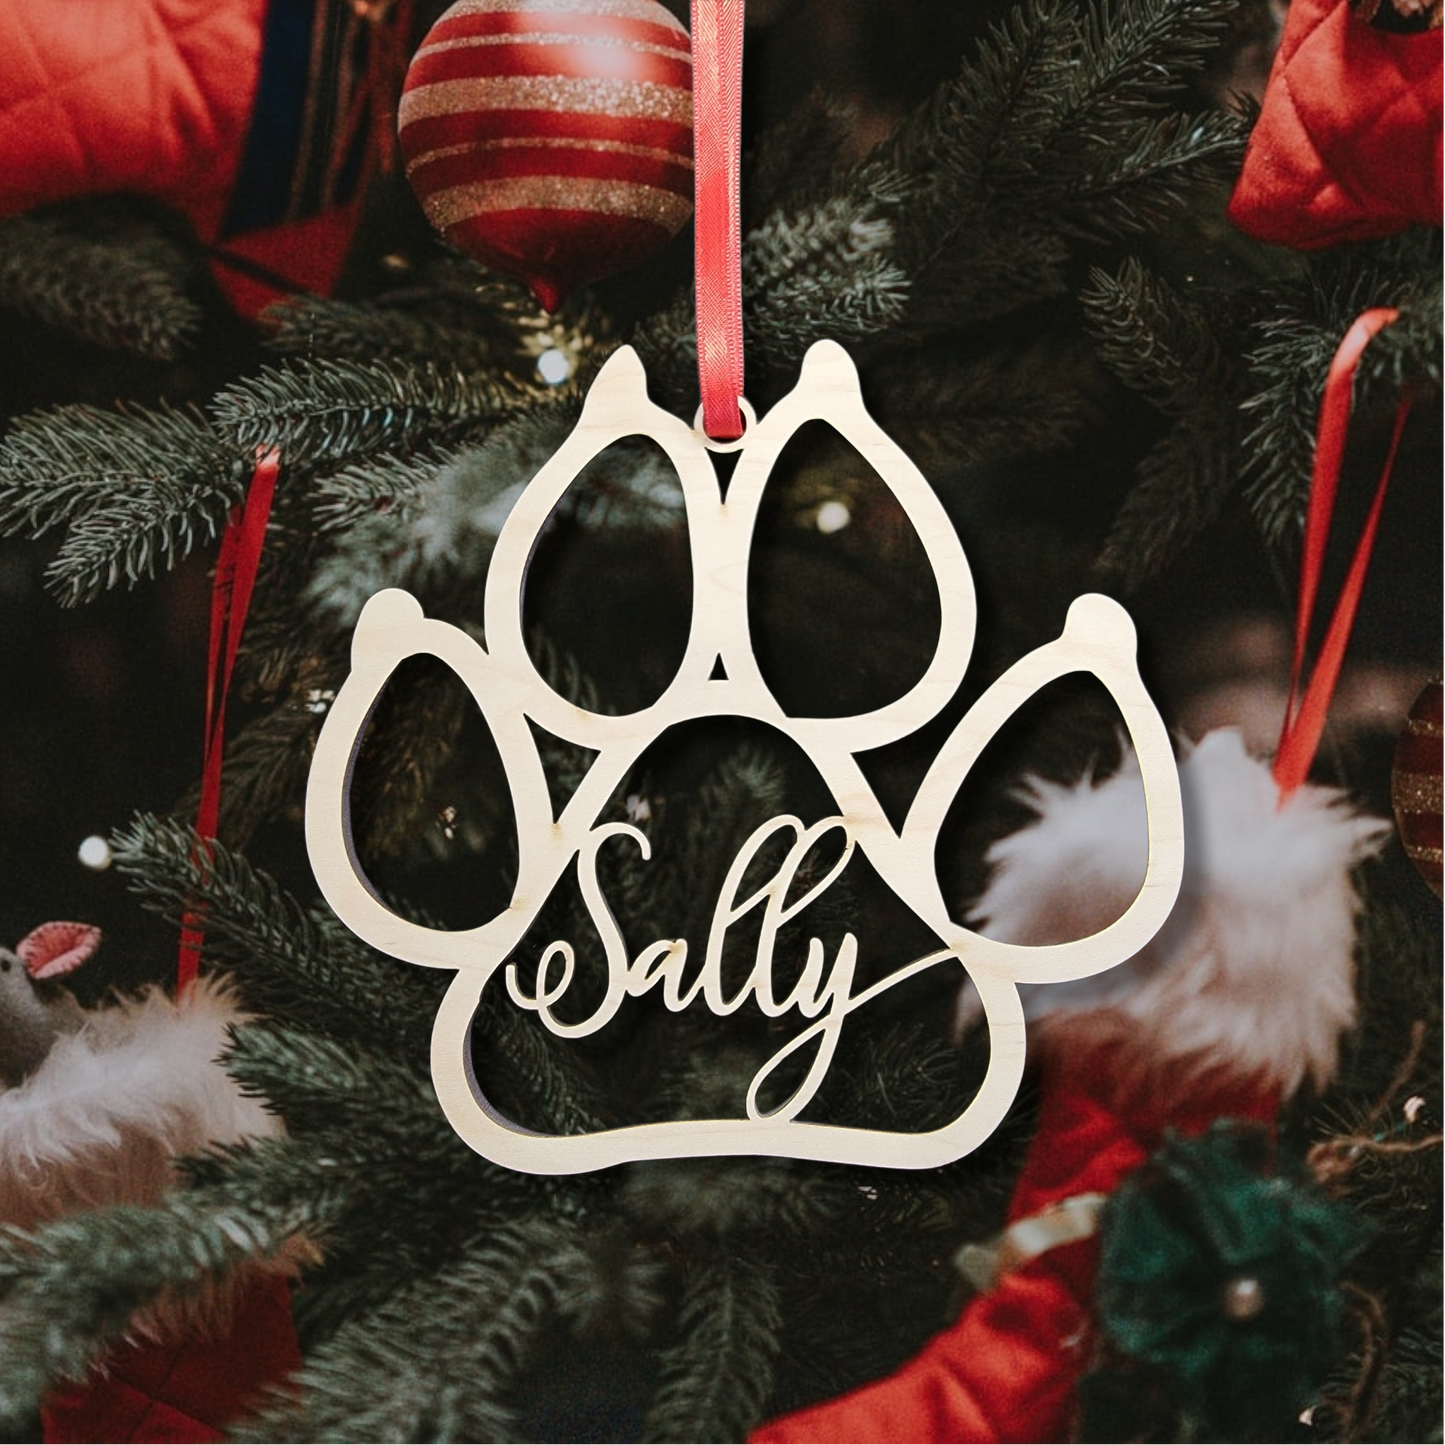 Personalized Pet Christmas Ornament, Custom Wood Cut out Paw Print, Dog Print Ornaments, Wooden PawPrint Ornament, Personalizable pet christmas ornaments